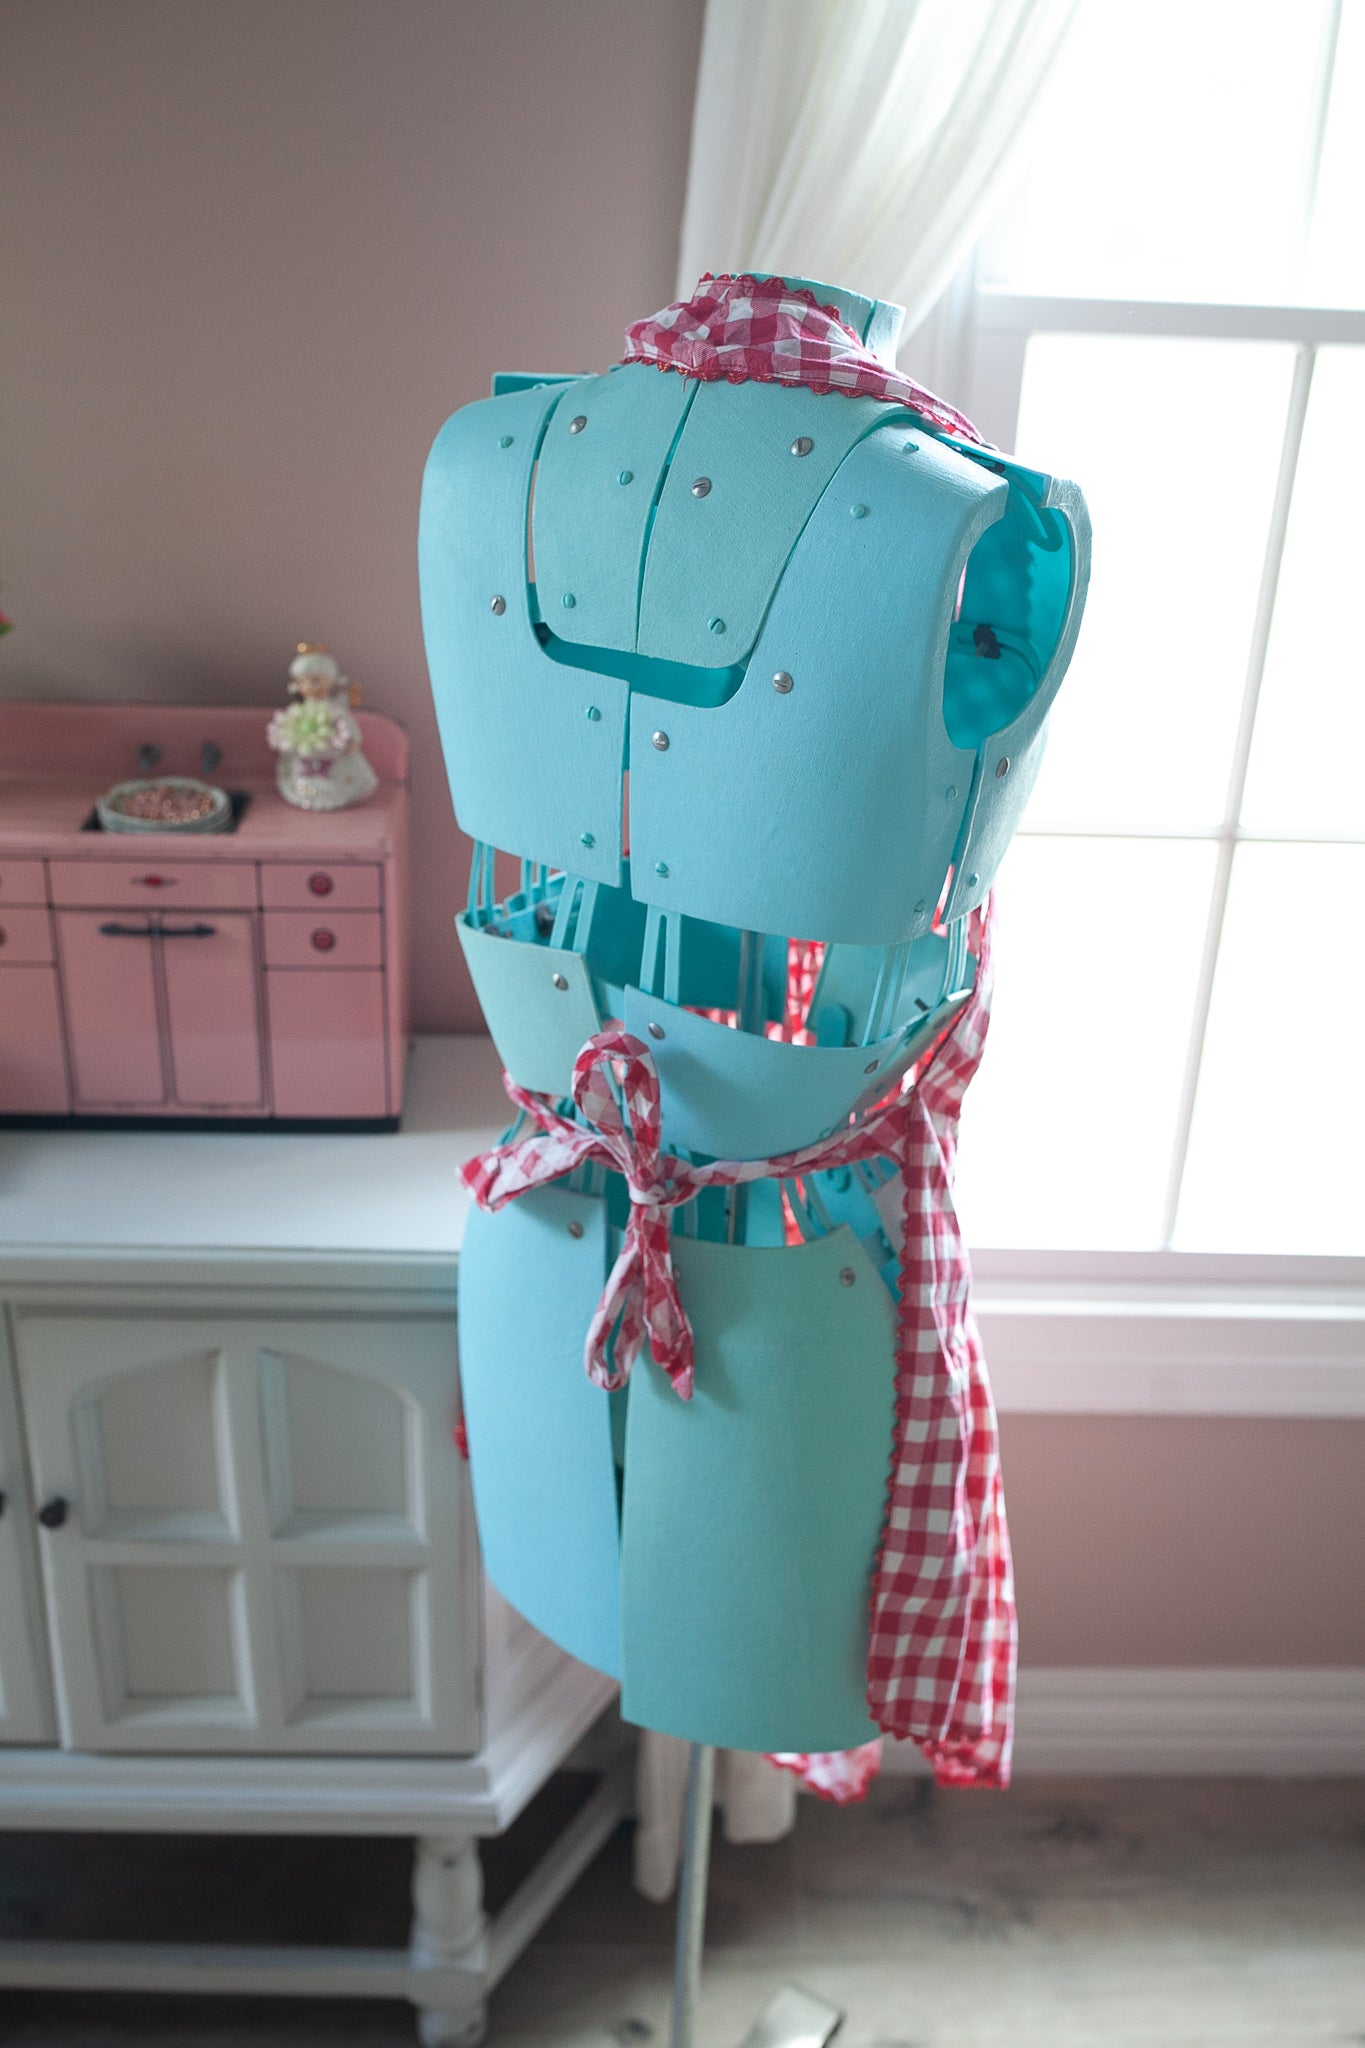 Vintage Apron- Full apron - Red and White Apron